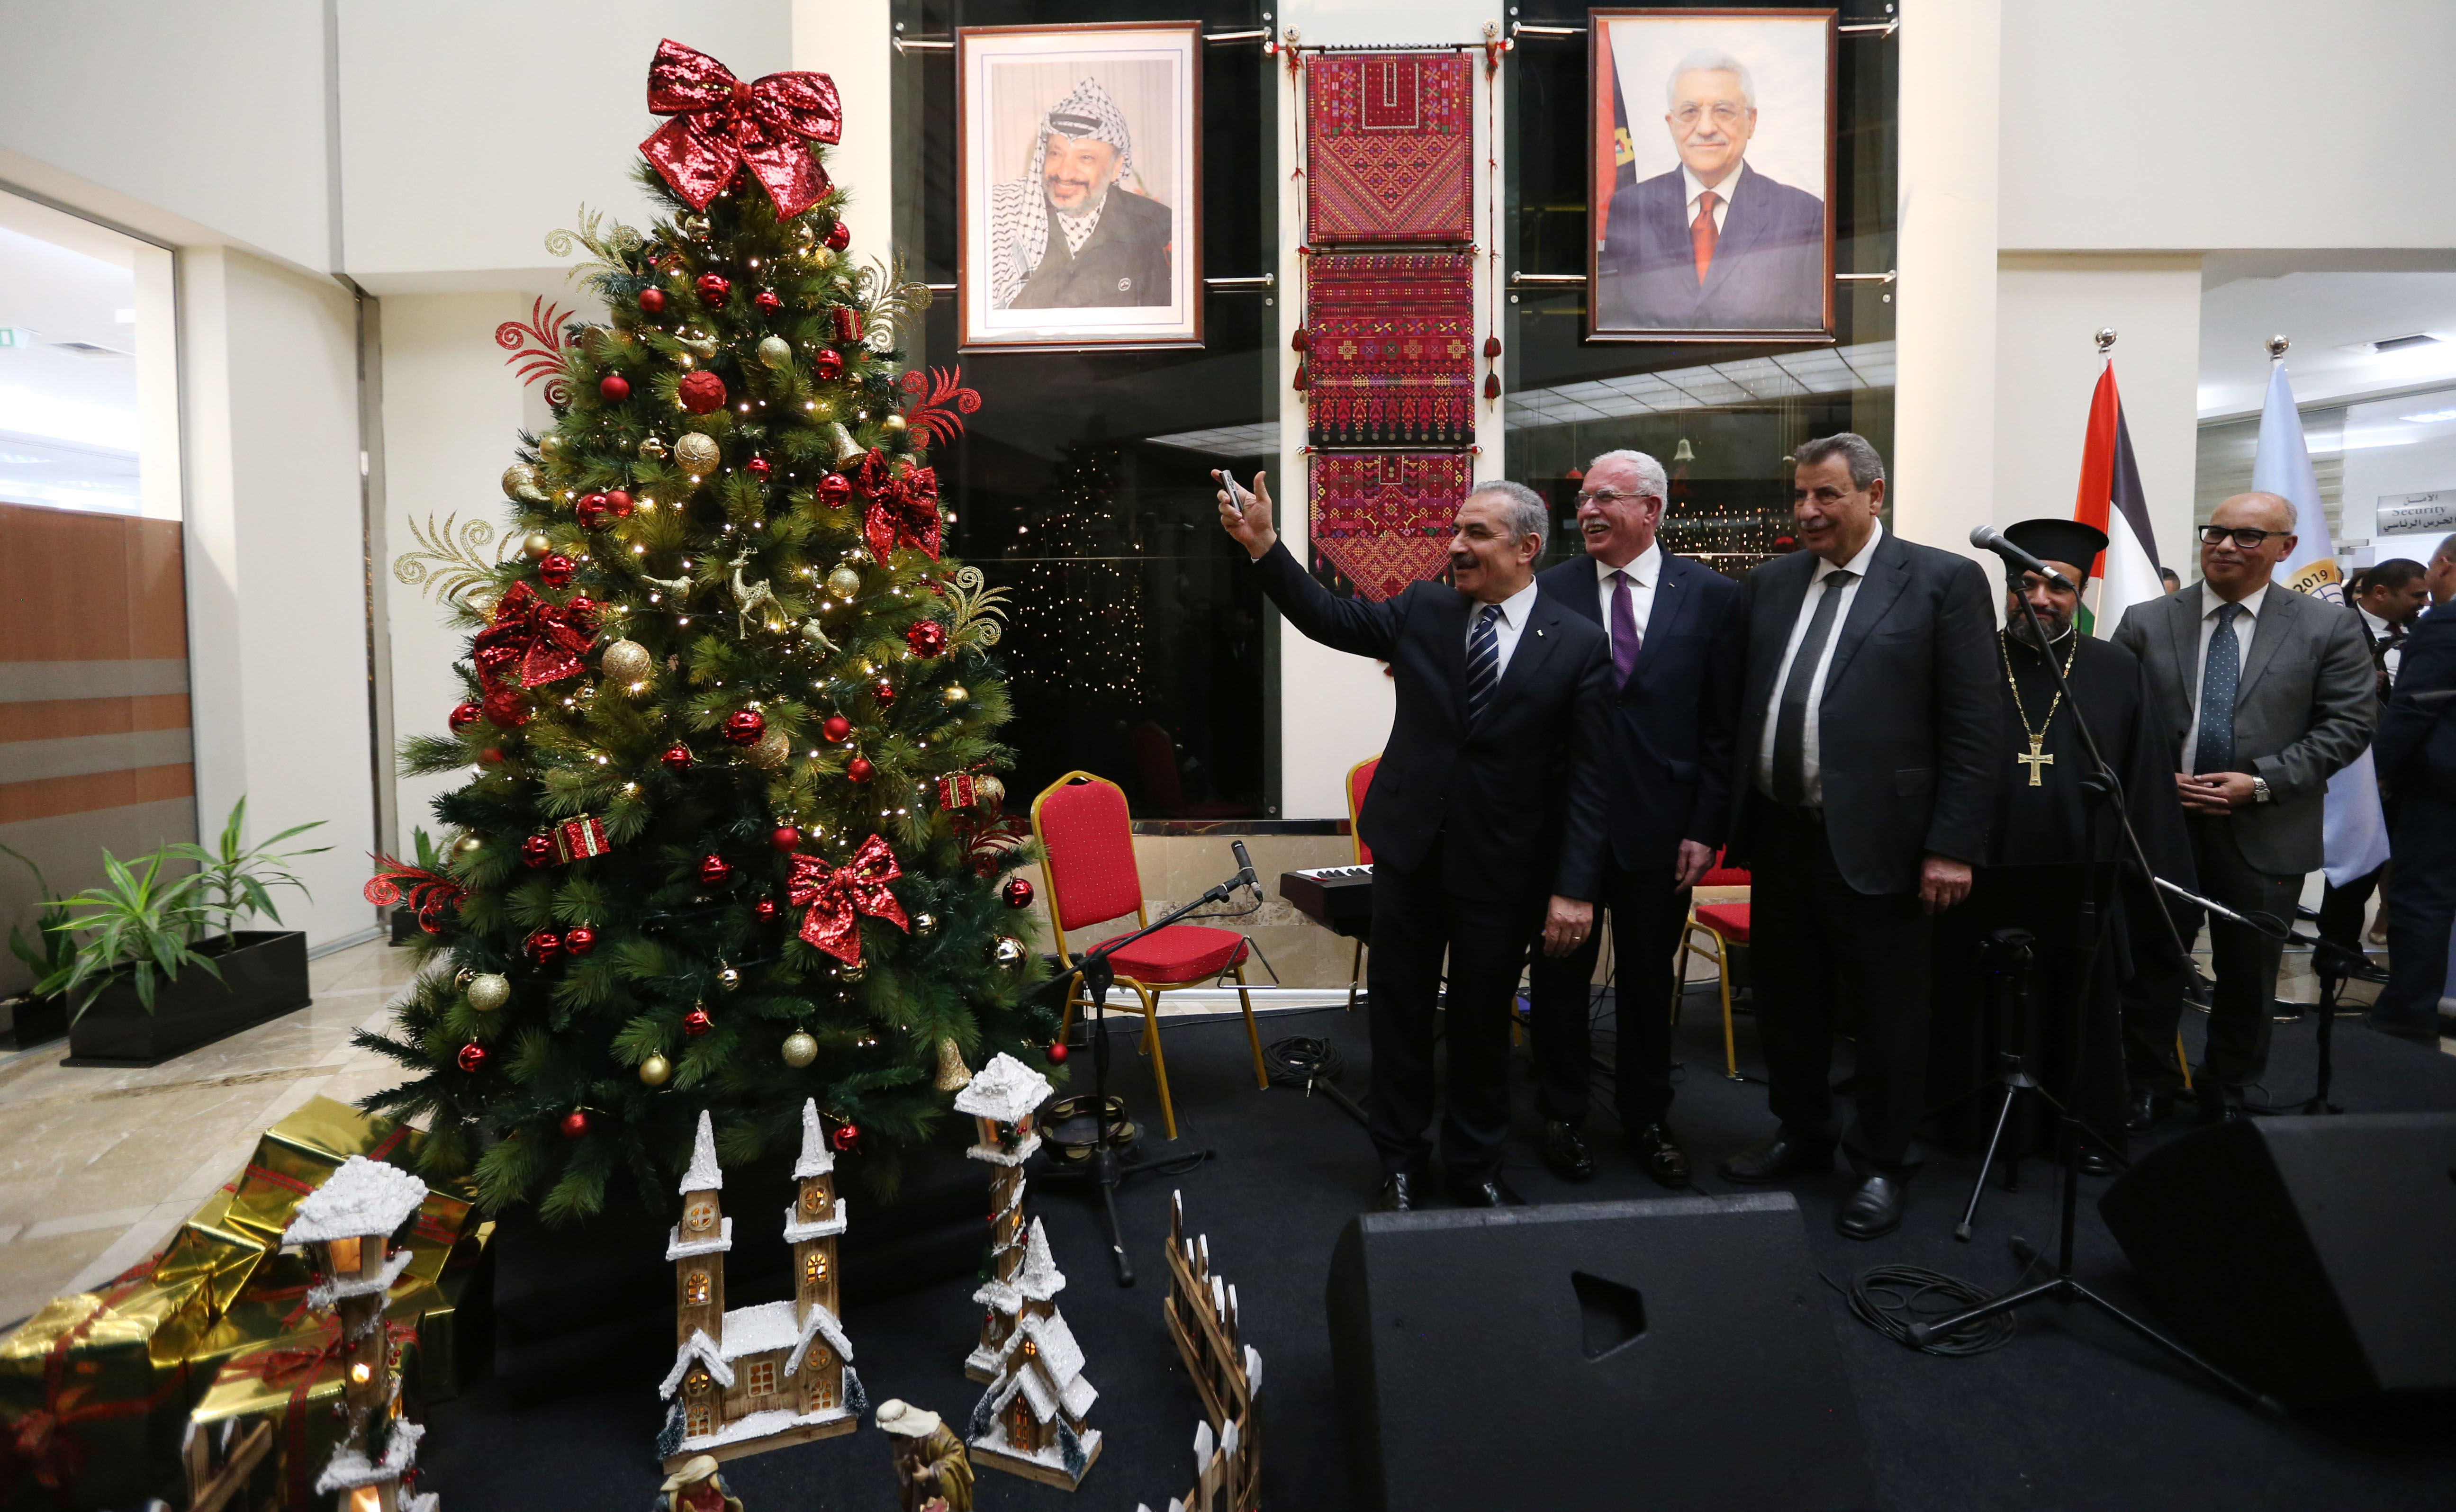 Prime minister: We are awaiting the Israeli response regarding elections in Jerusalem